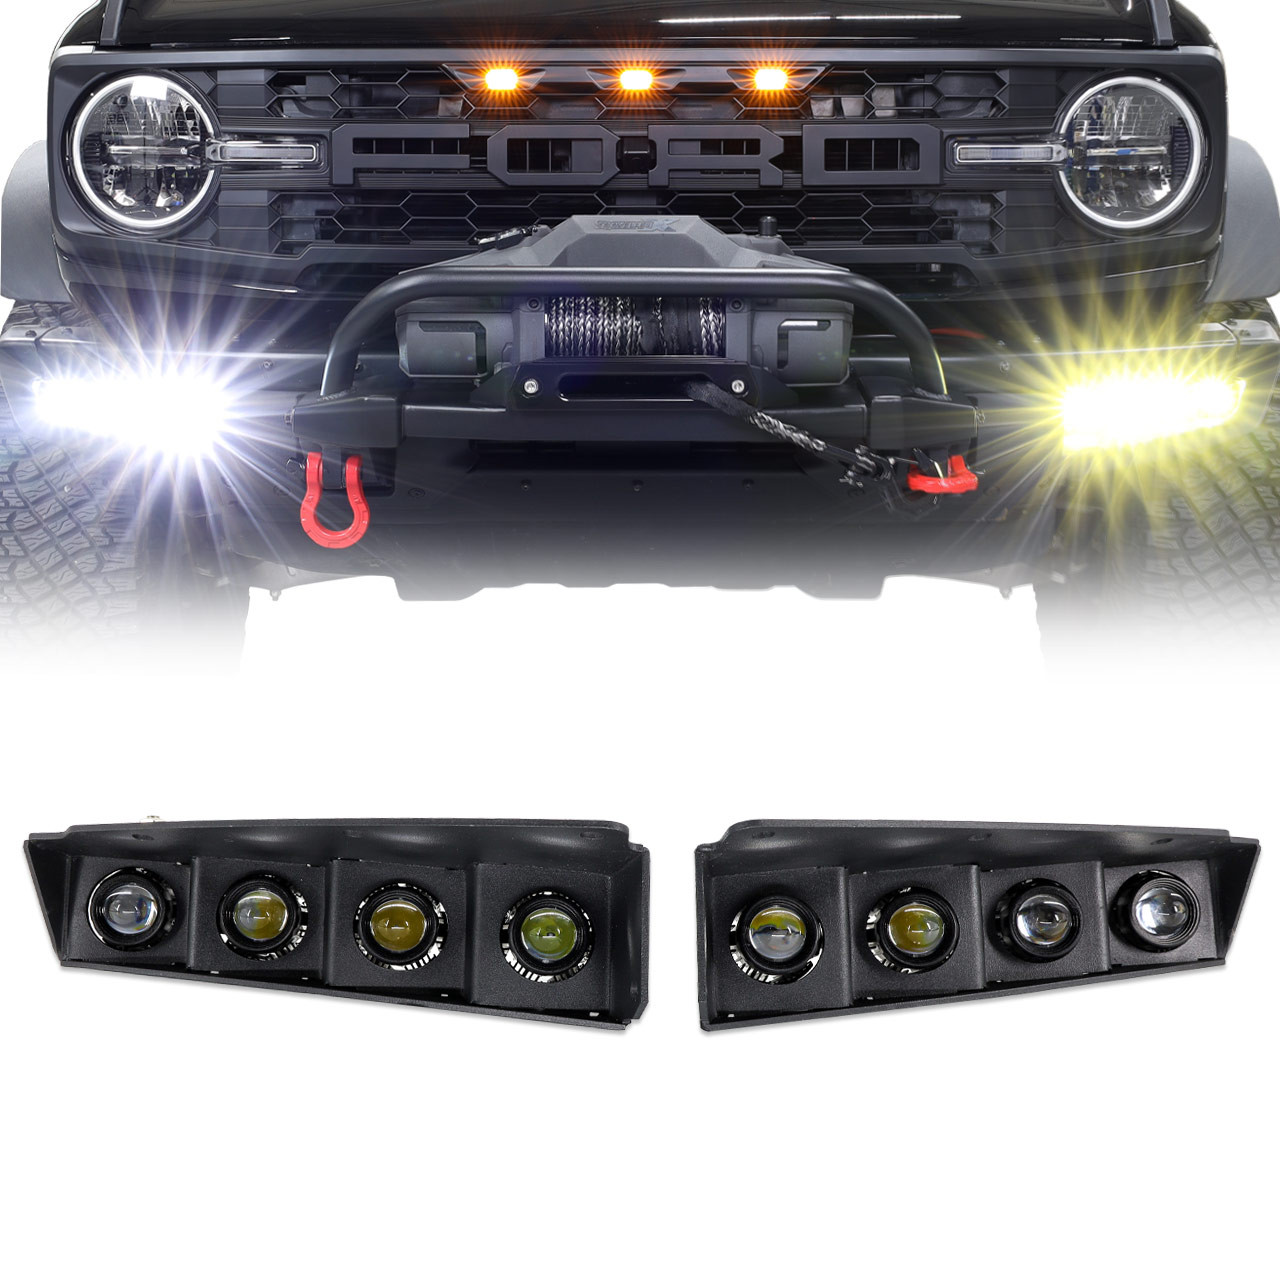 IAG I-Line 4 Lamp Fog Light Kit for use with Modular Bumper & 6 Way Aux Switch Panel fits 2021+ Ford Bronco